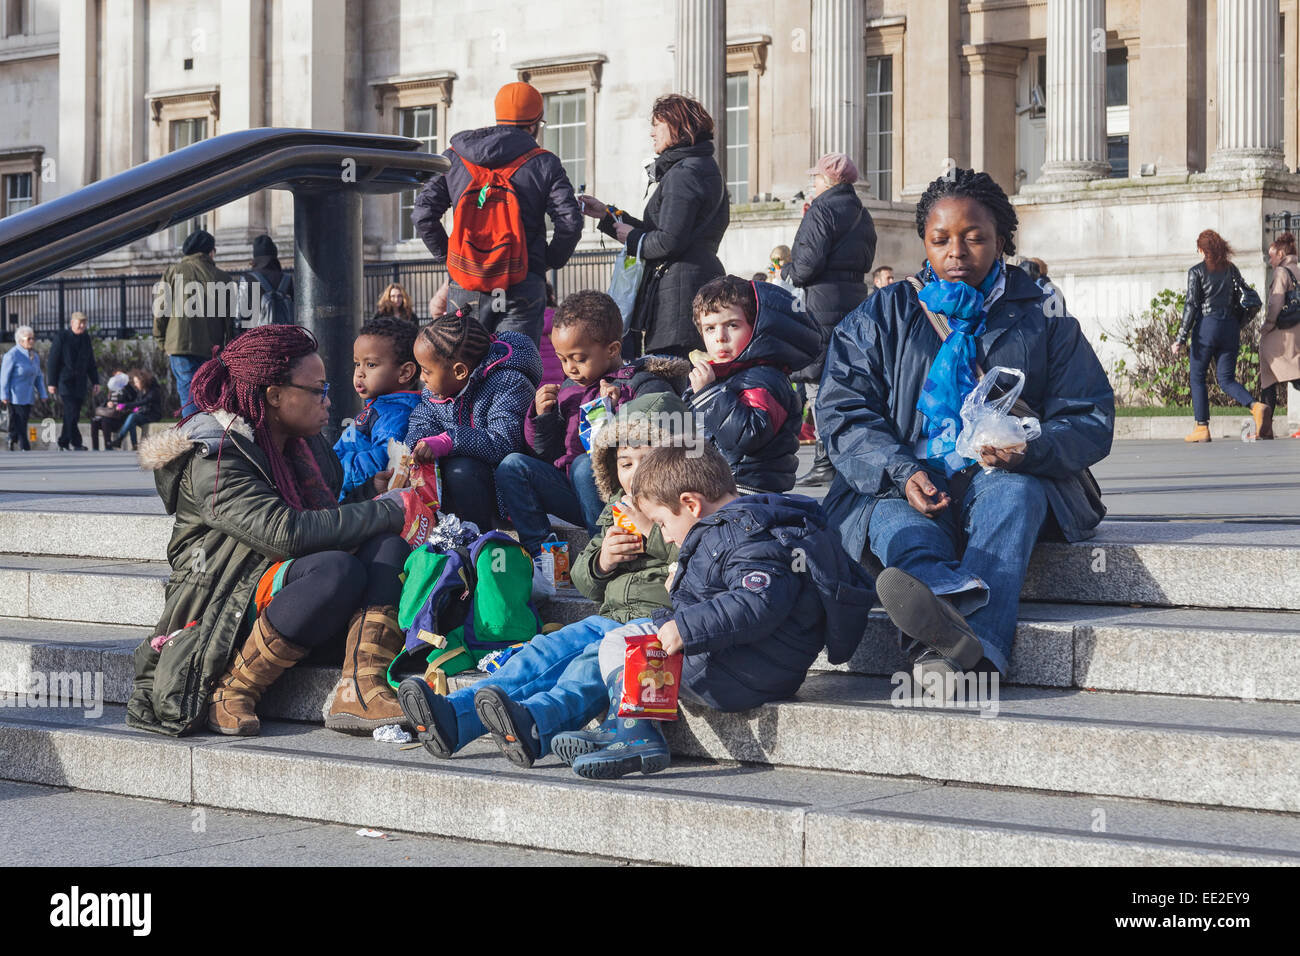 London, Trafalgar Square   A group of Primary School children relaxing with their teachers Stock Photo